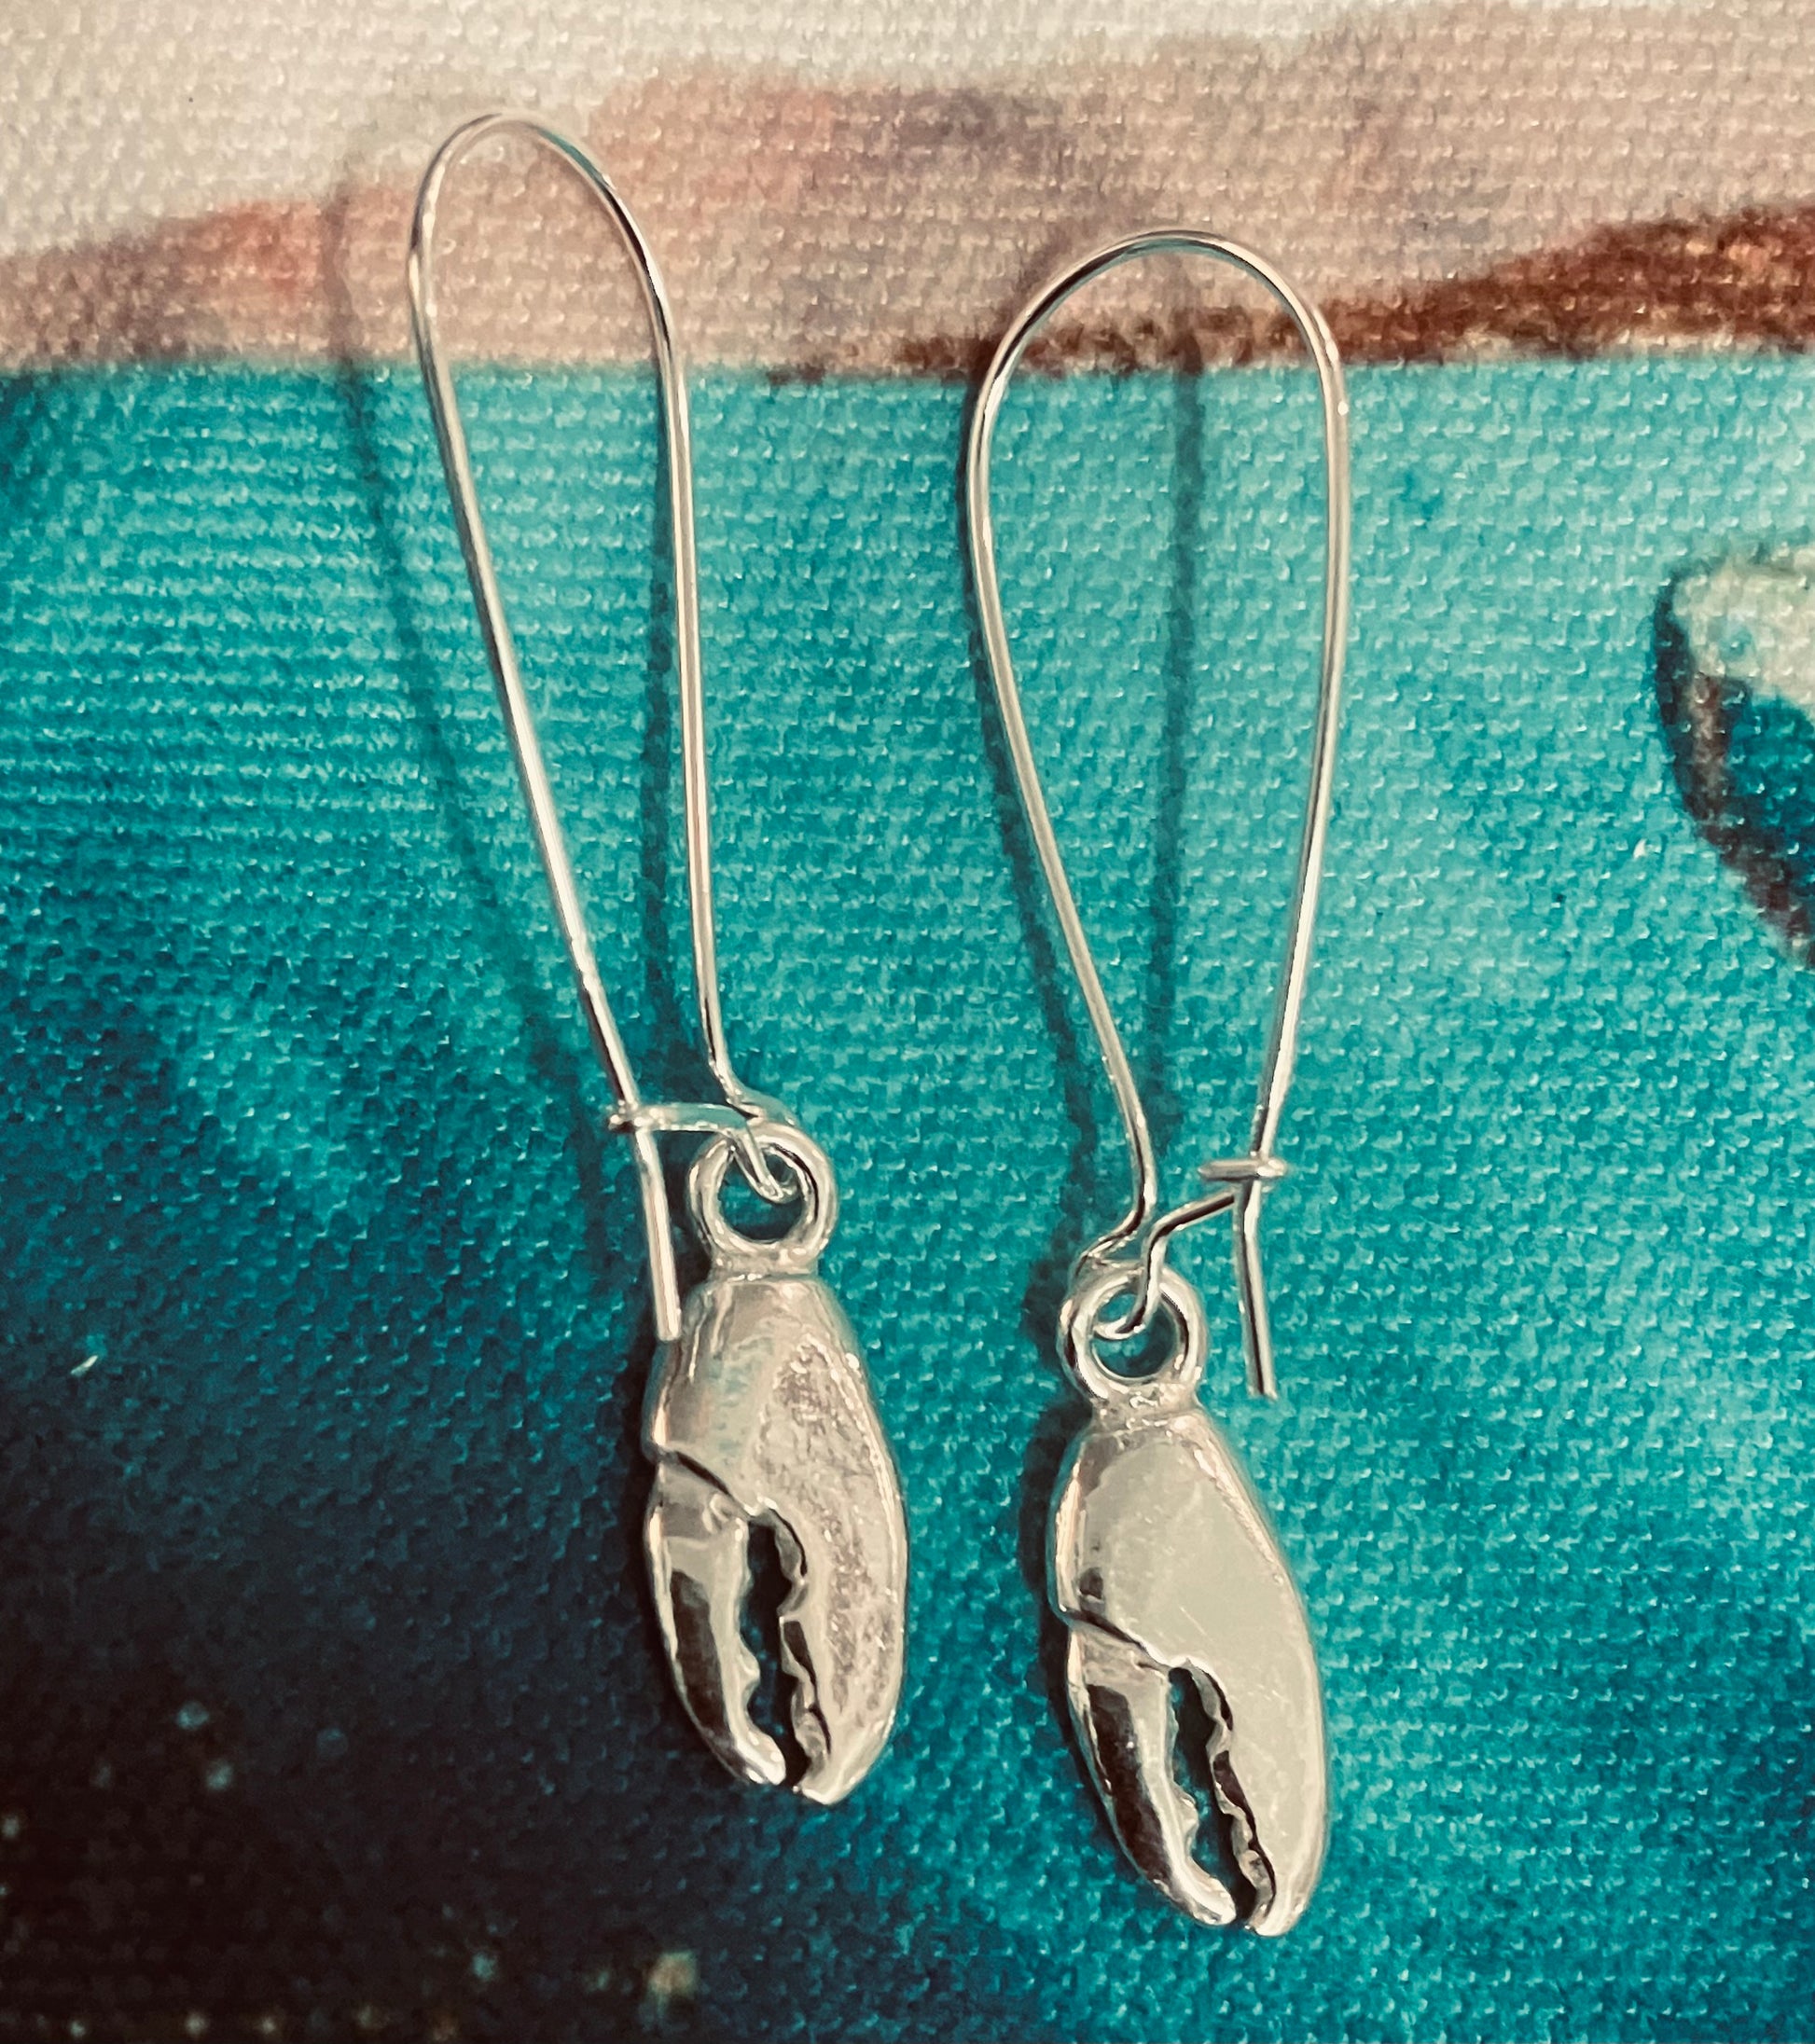 Crab Claw earrings